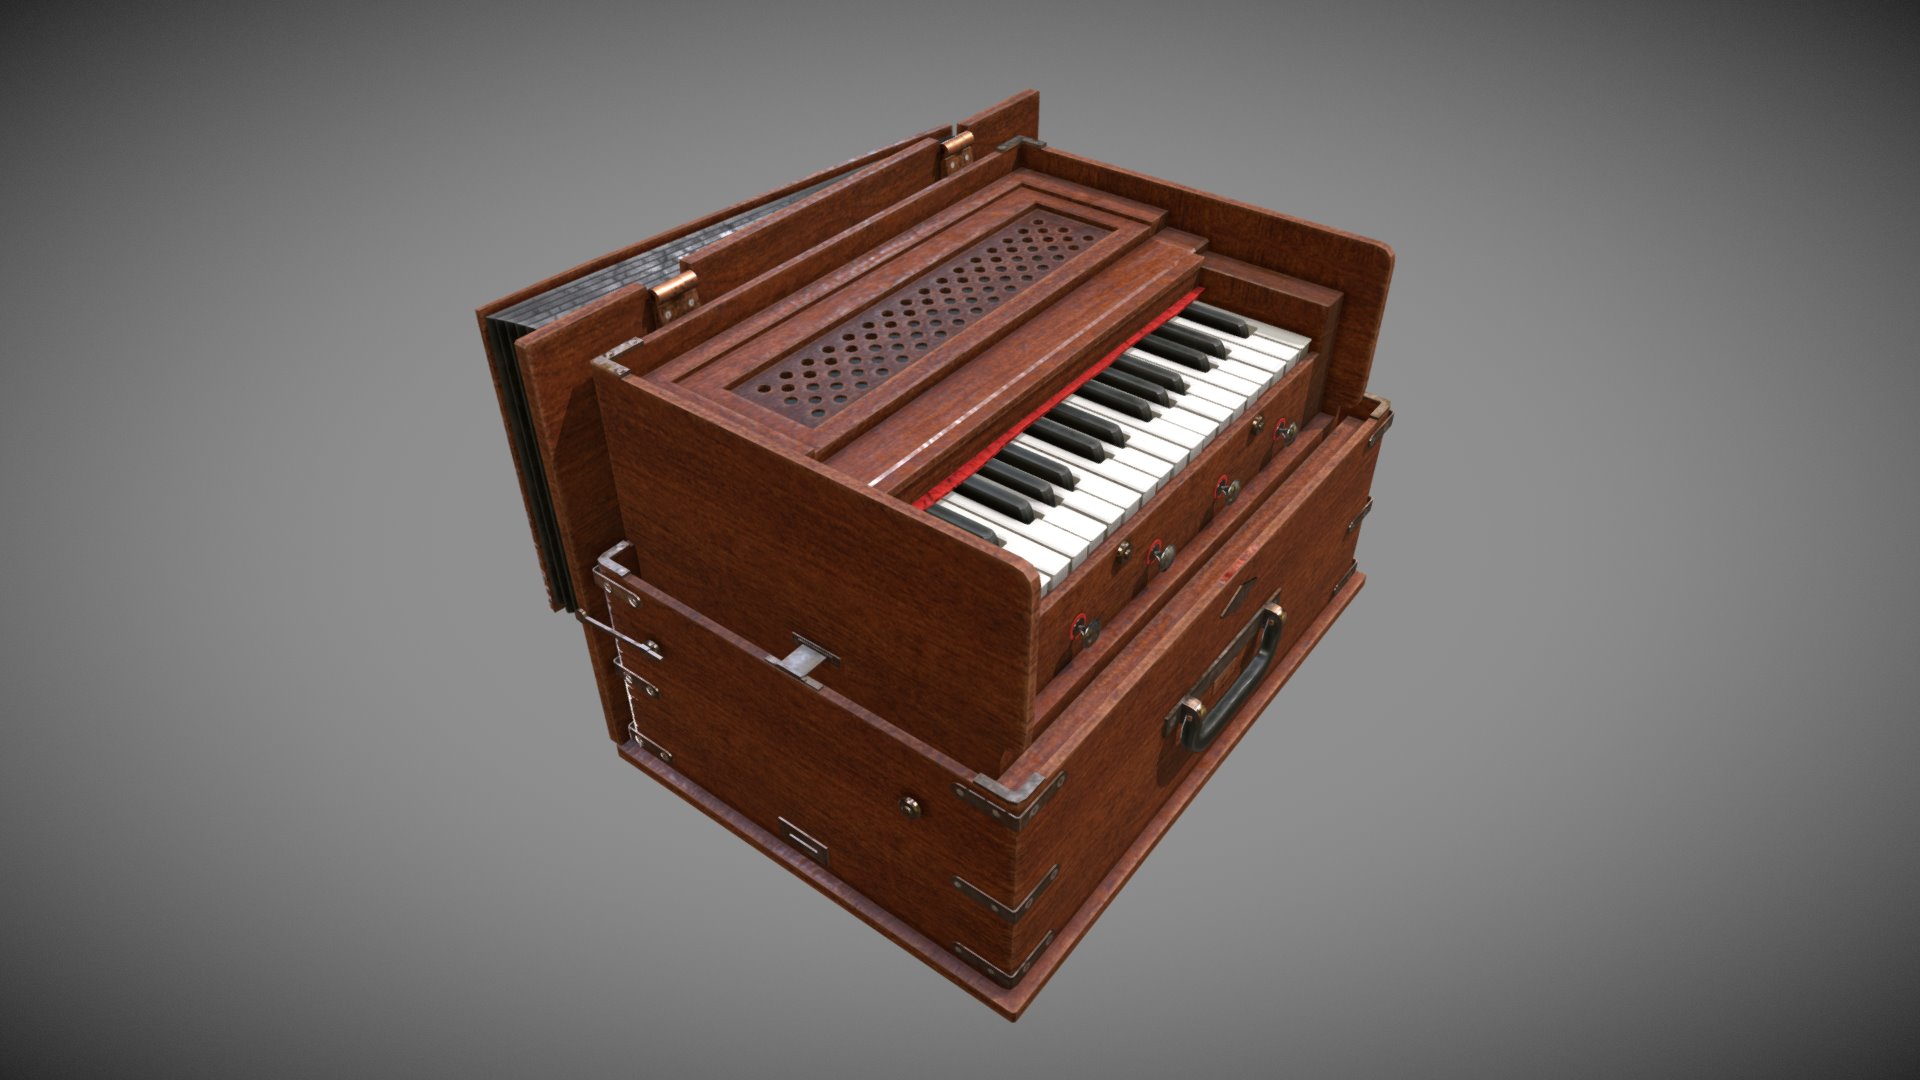 3D model Indian Harmonium - This is a 3D model of the Indian Harmonium. The 3D model is about a wooden box with a keyboard.